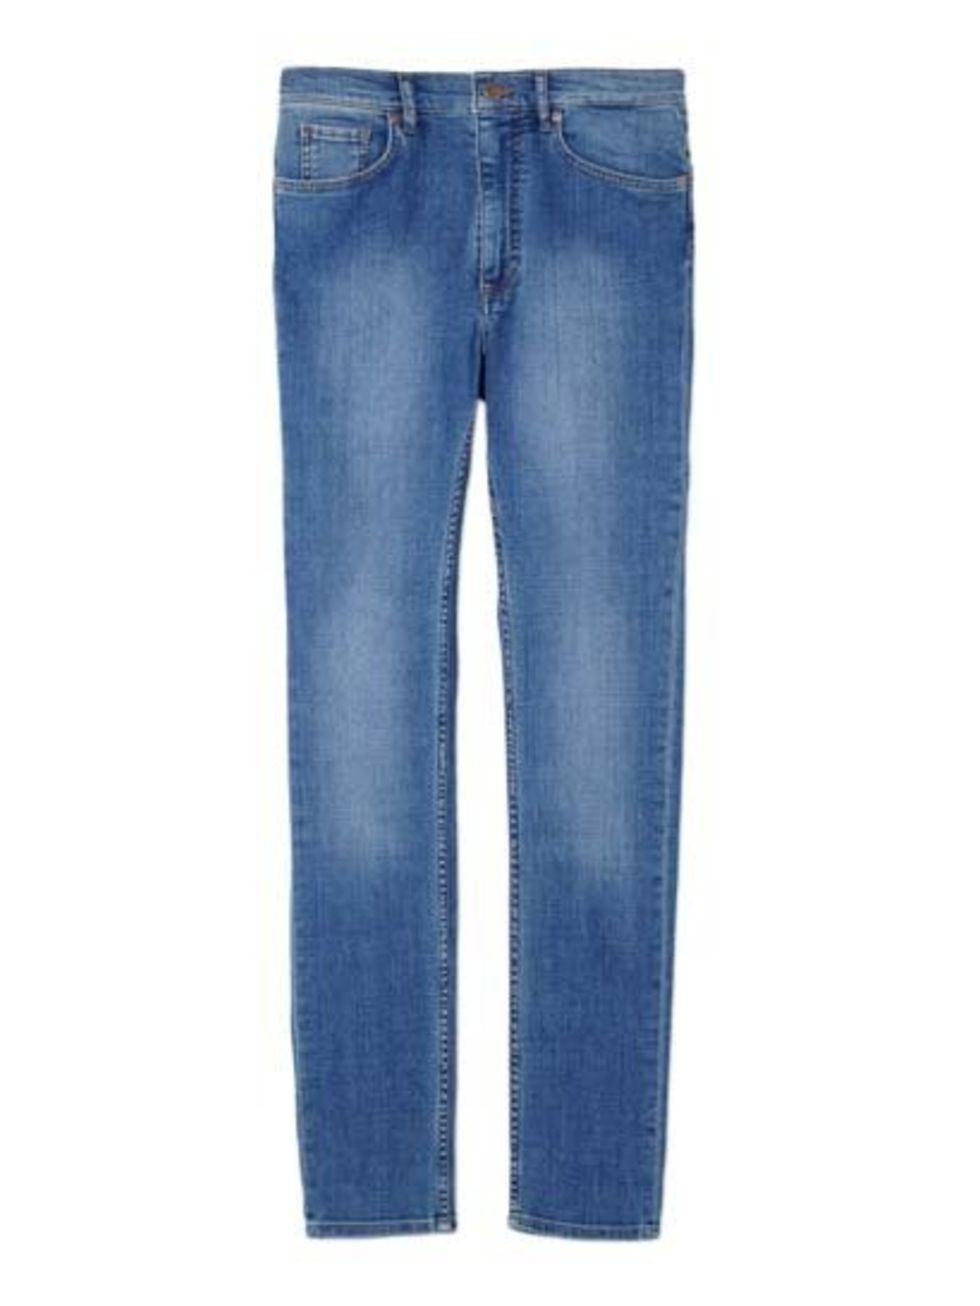 <p>Fashion Features Writer Emma Sells practically collects denim - so she always has an eye out for a great pair of jeans. </p><p><a href="http://www.cosstores.com/gb/Shop/Women/Denim/Slim-fit_jeans/359710-10091811.1">COS</a> jeans, £59</p>